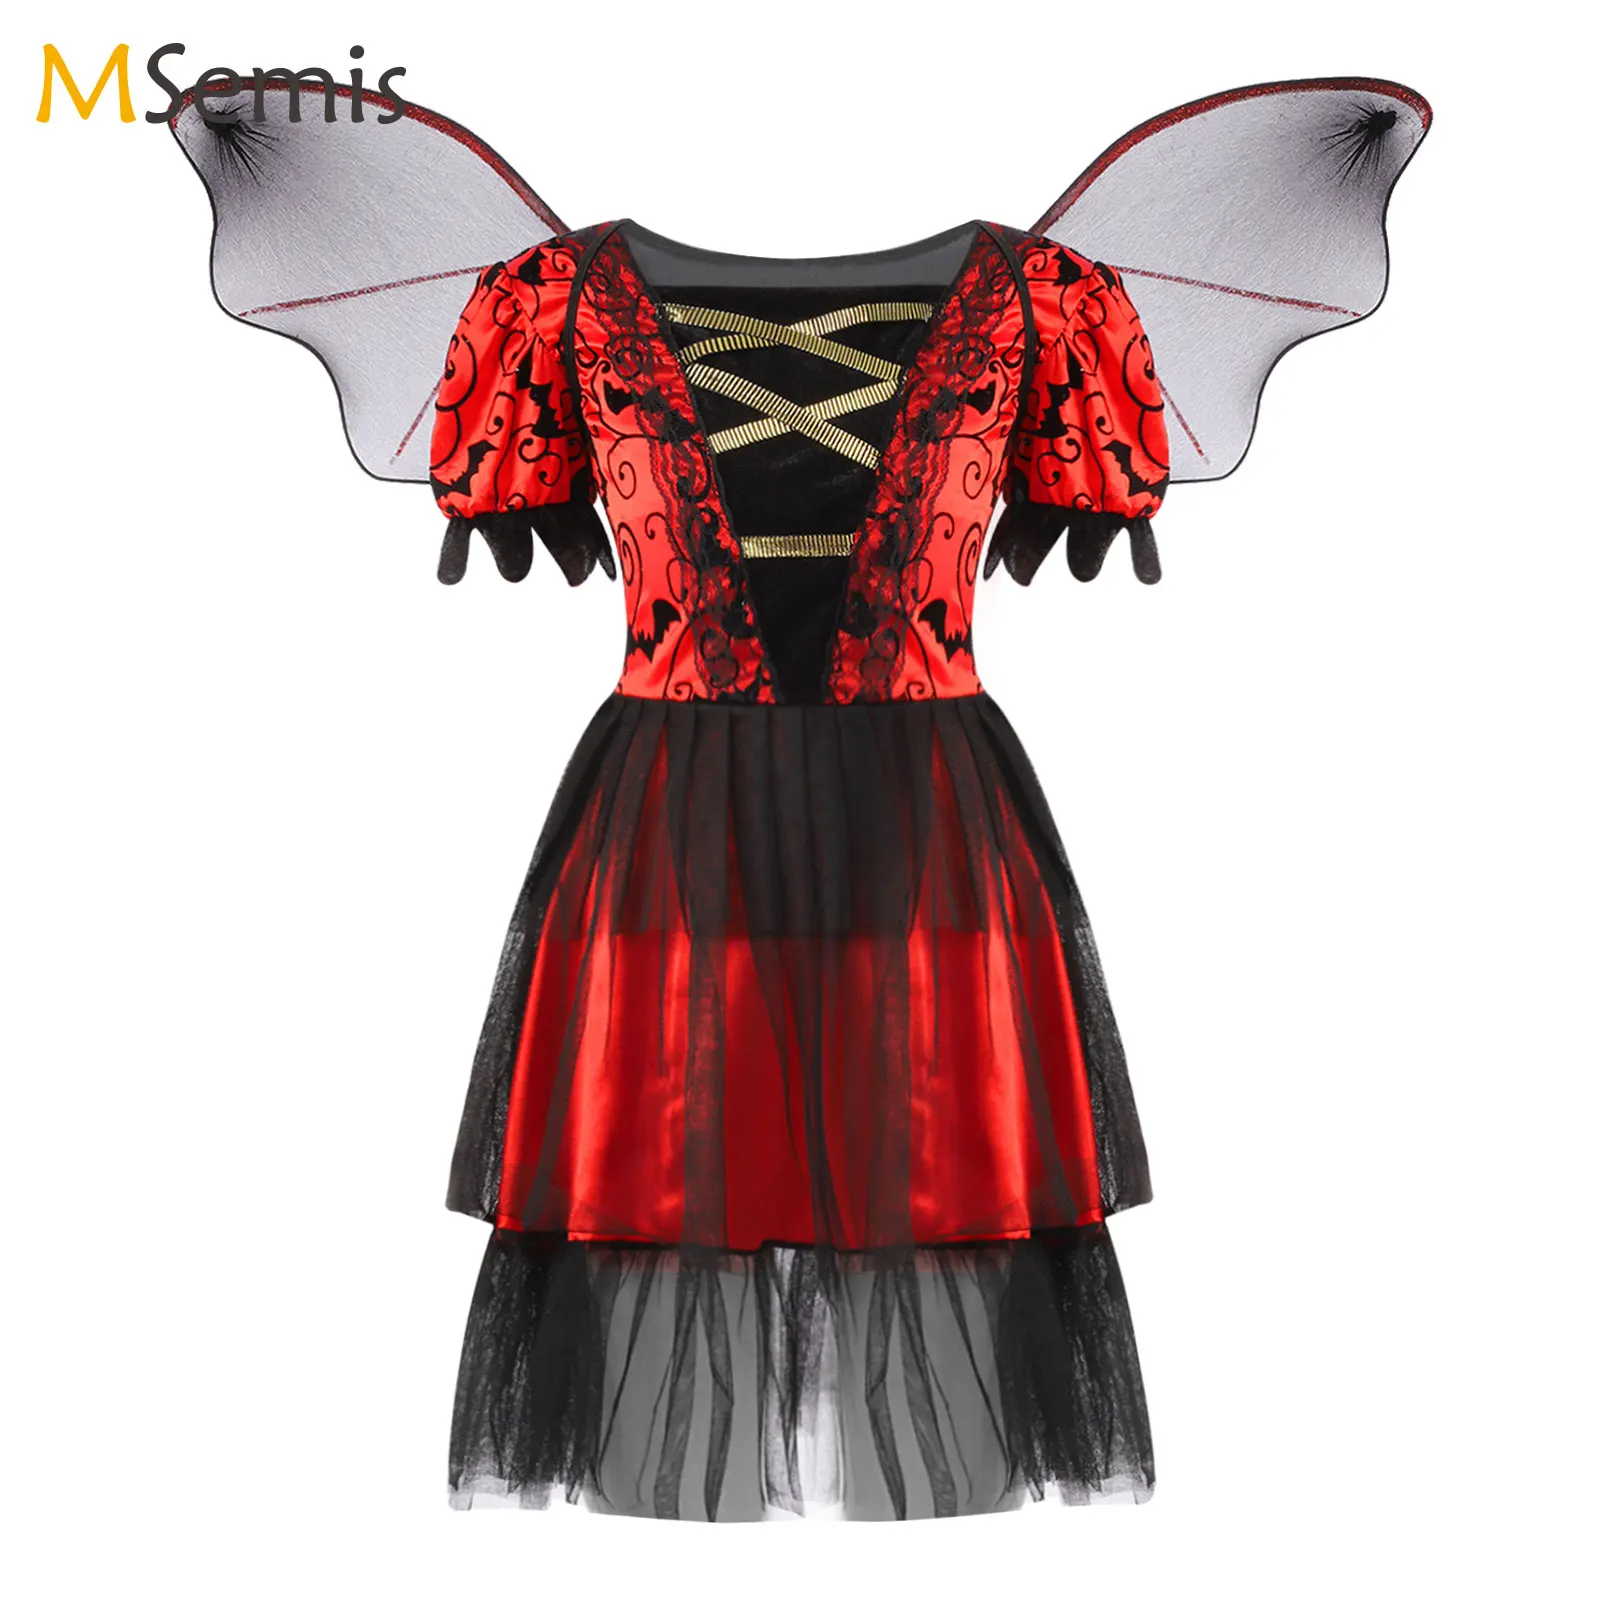 

Kids Girls Halloween Cosplay Witch Vampire Role Play Performance Costume Lace-up Bat Print Mesh Dress with Wings Witch Outfit